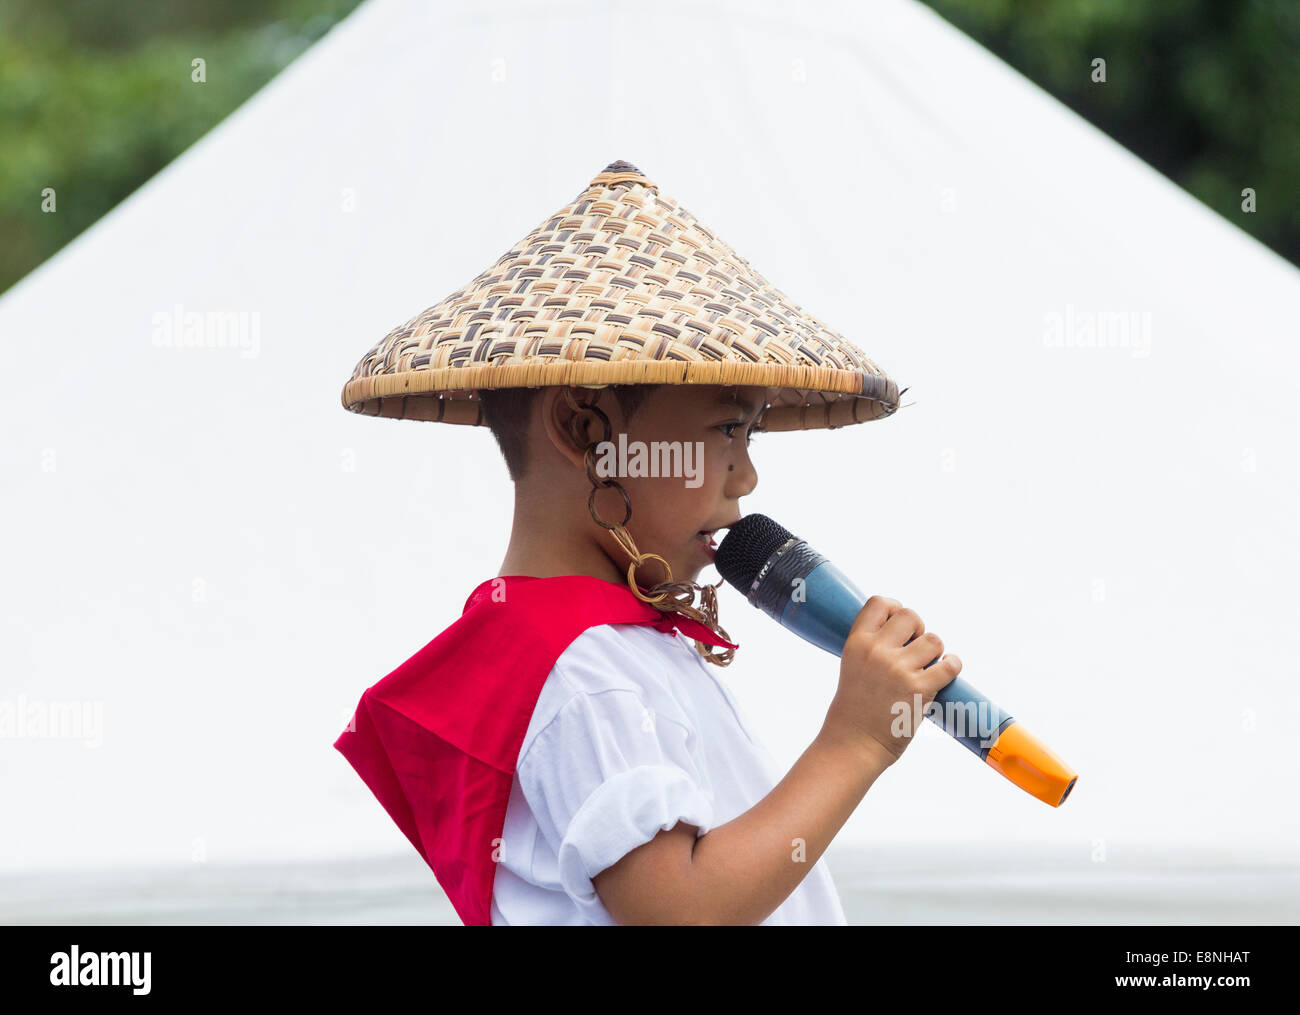 Young boy from Philippines in traditional costume wearing Salakot hat ...